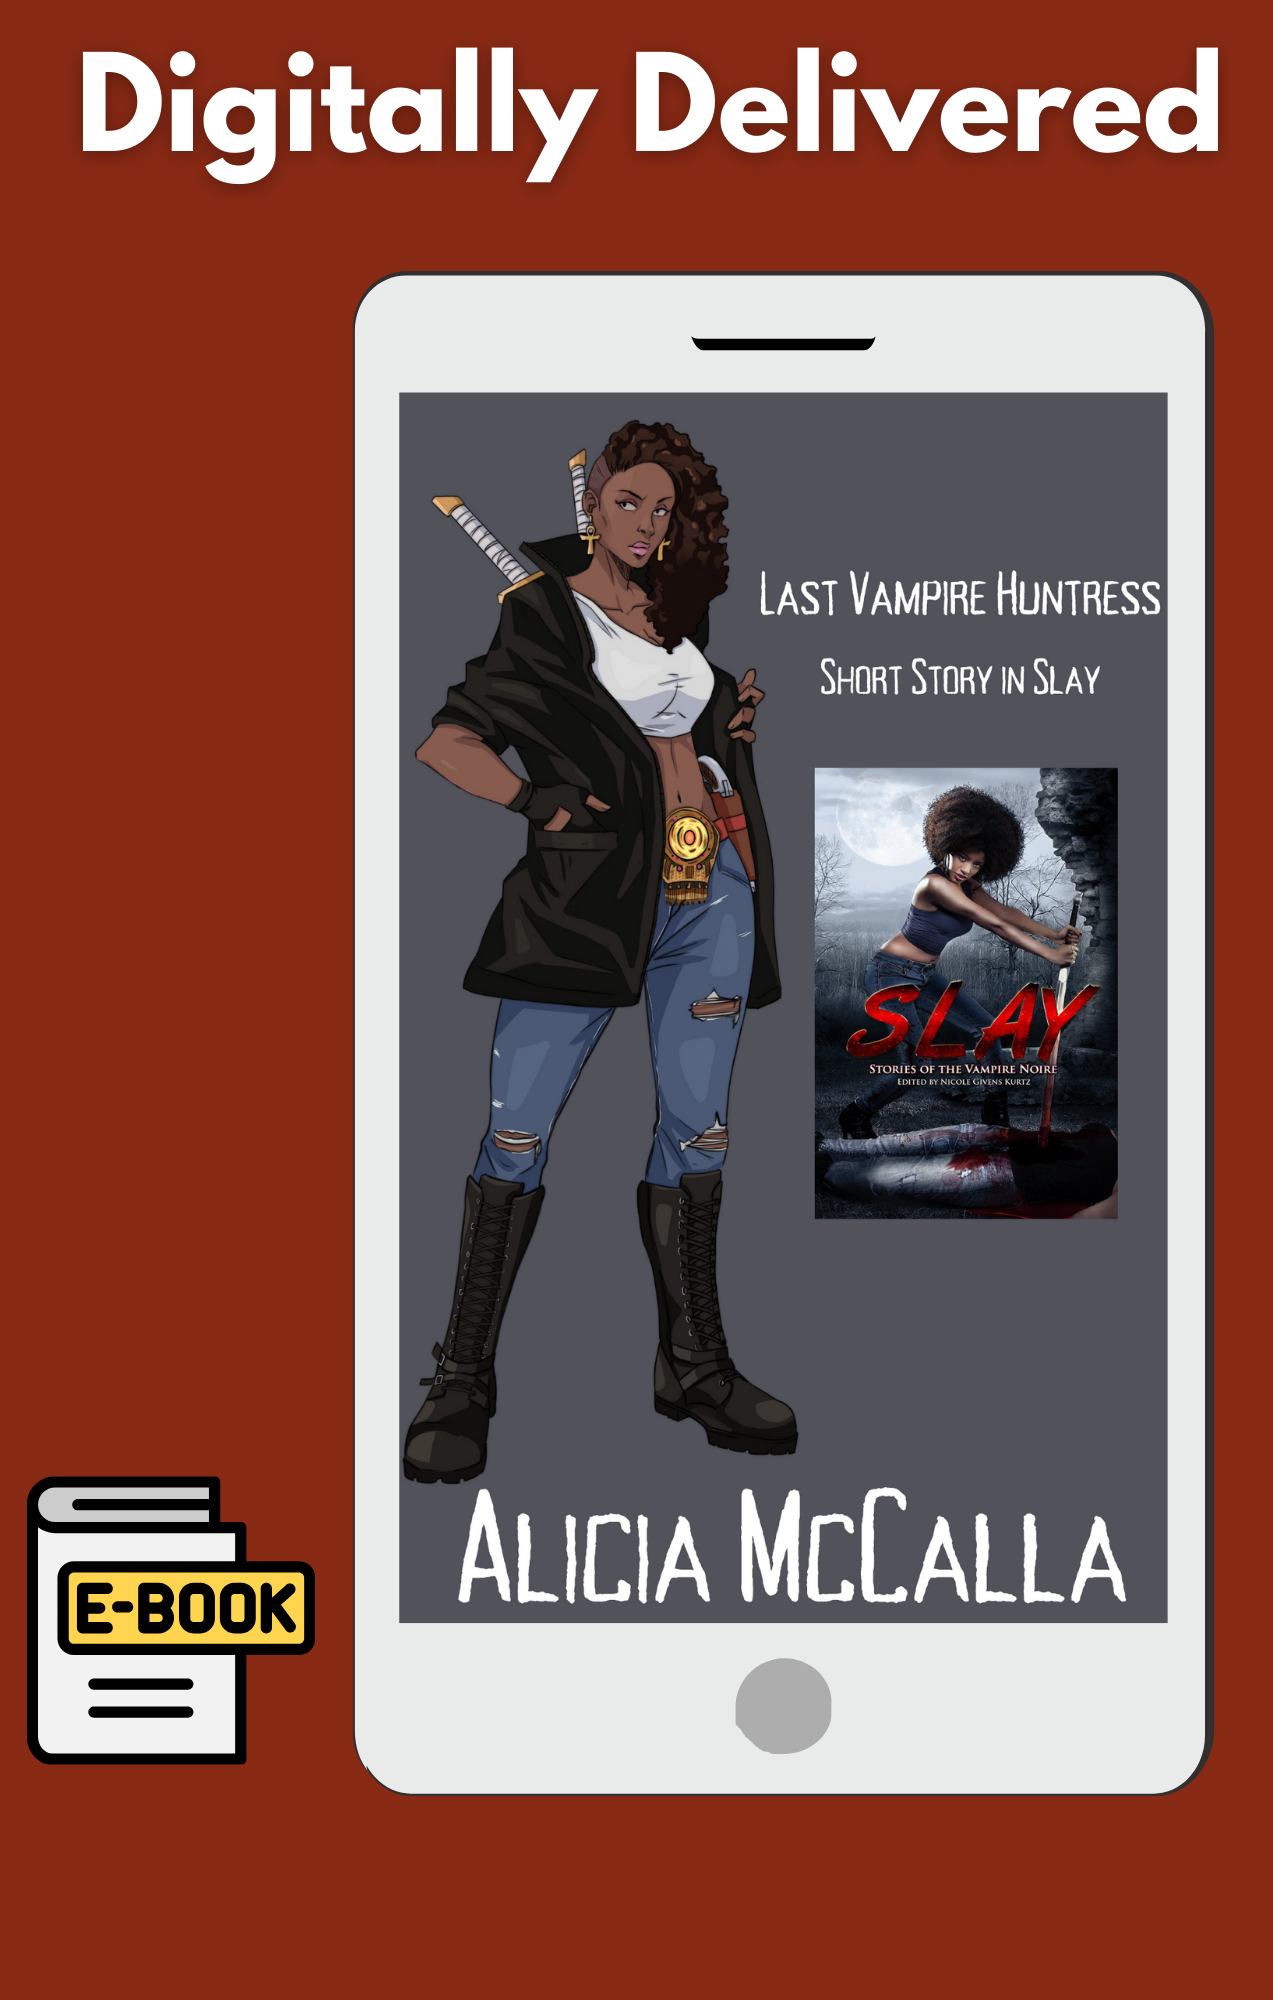 Last Vampire Huntress Written By Alicia McCalla in the Slay Anthology